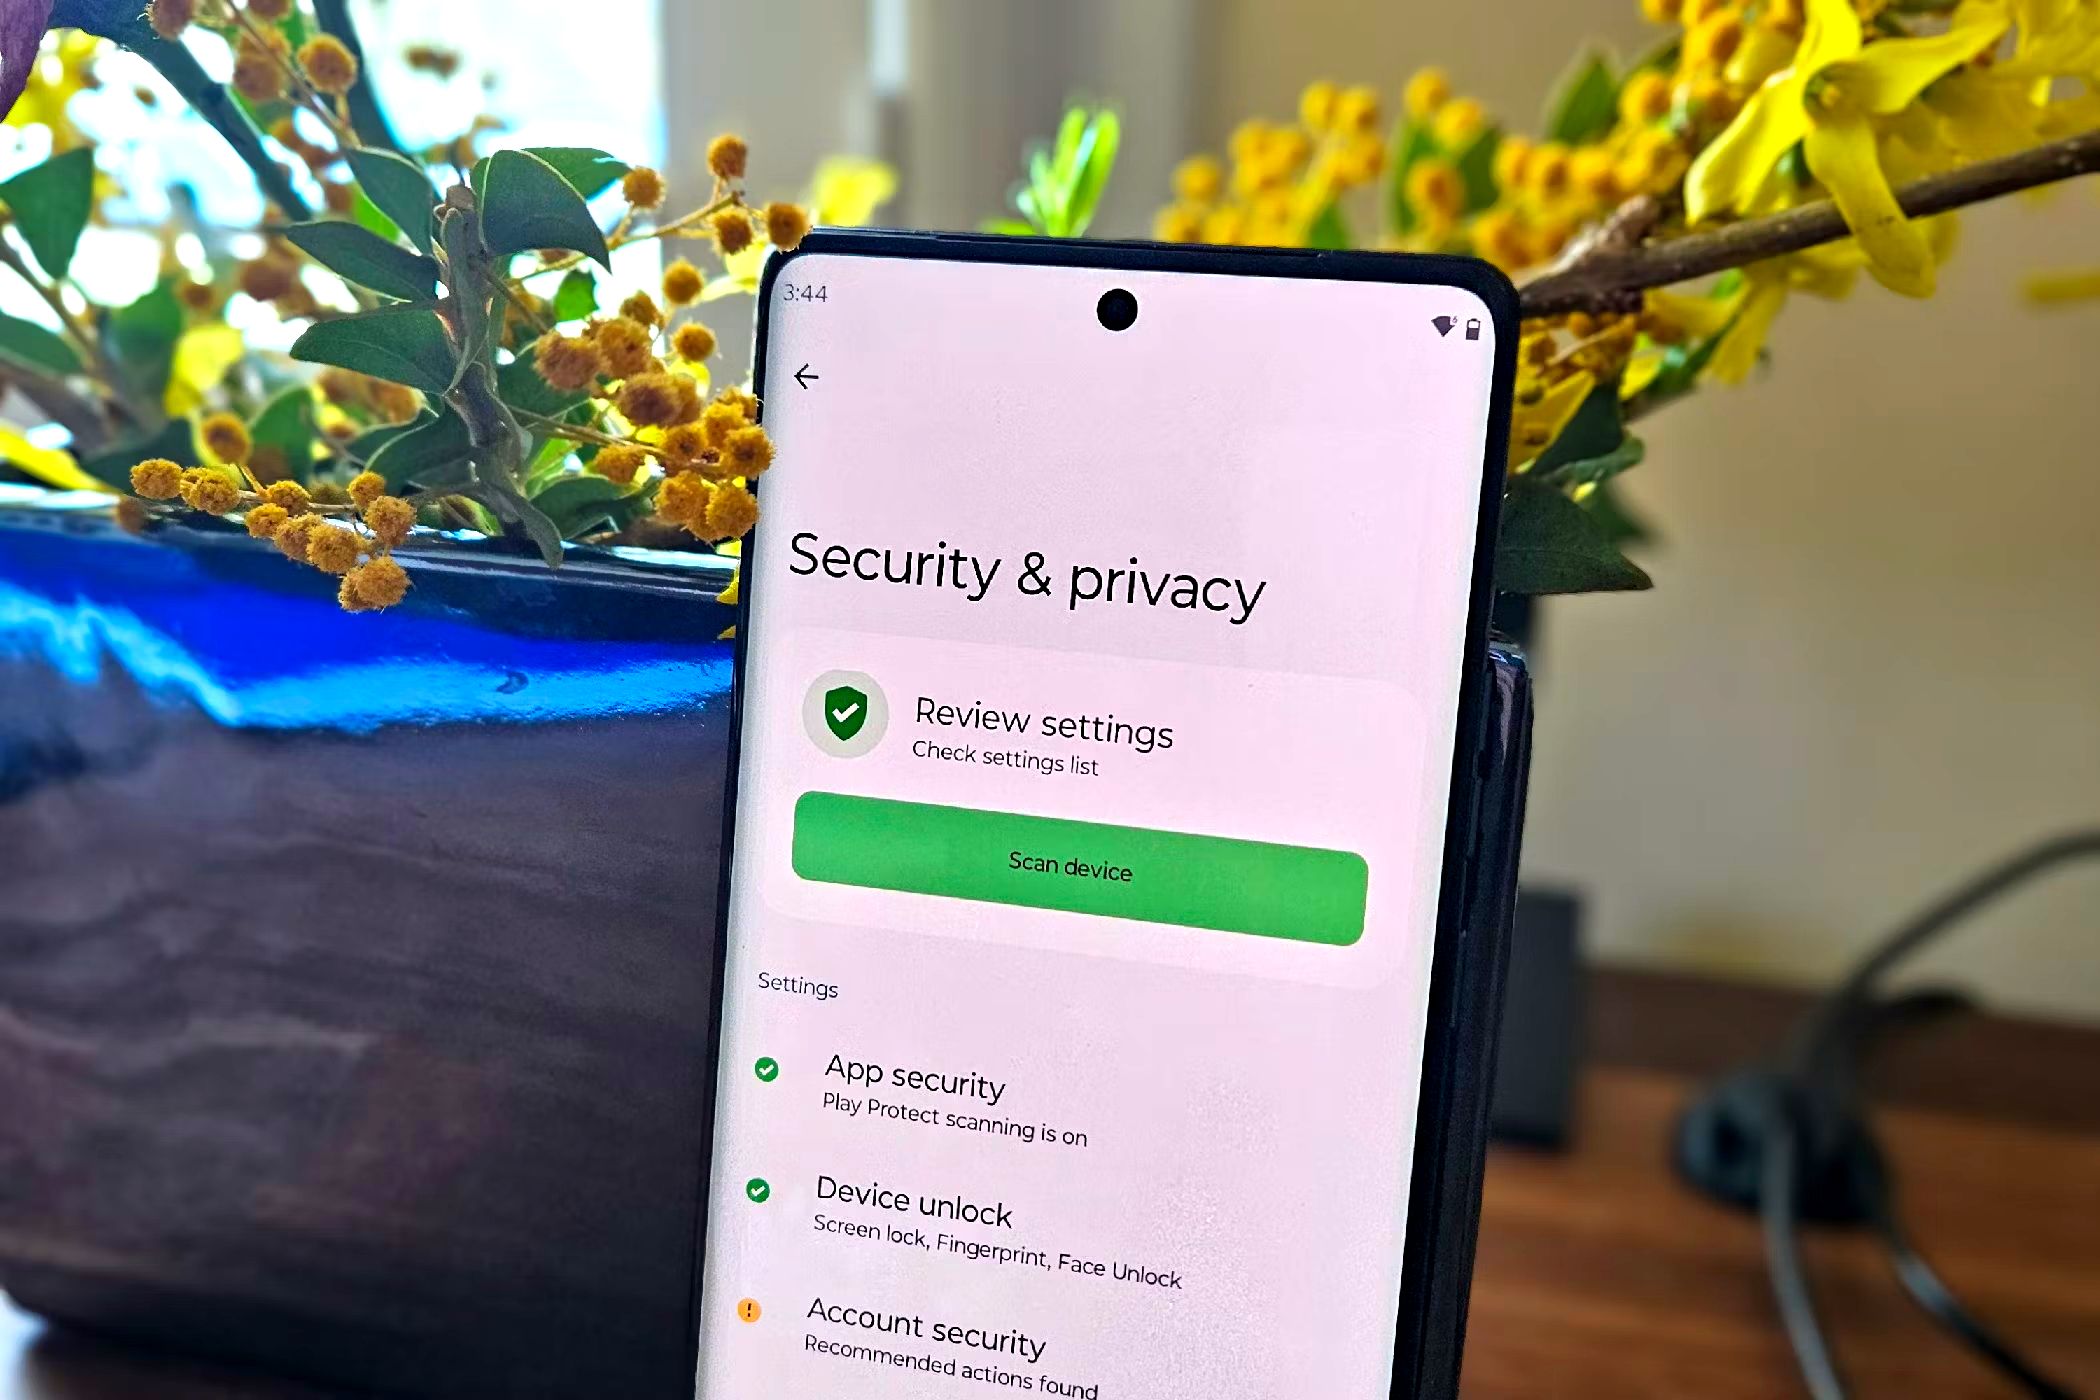 Android Security & Privacy screen.